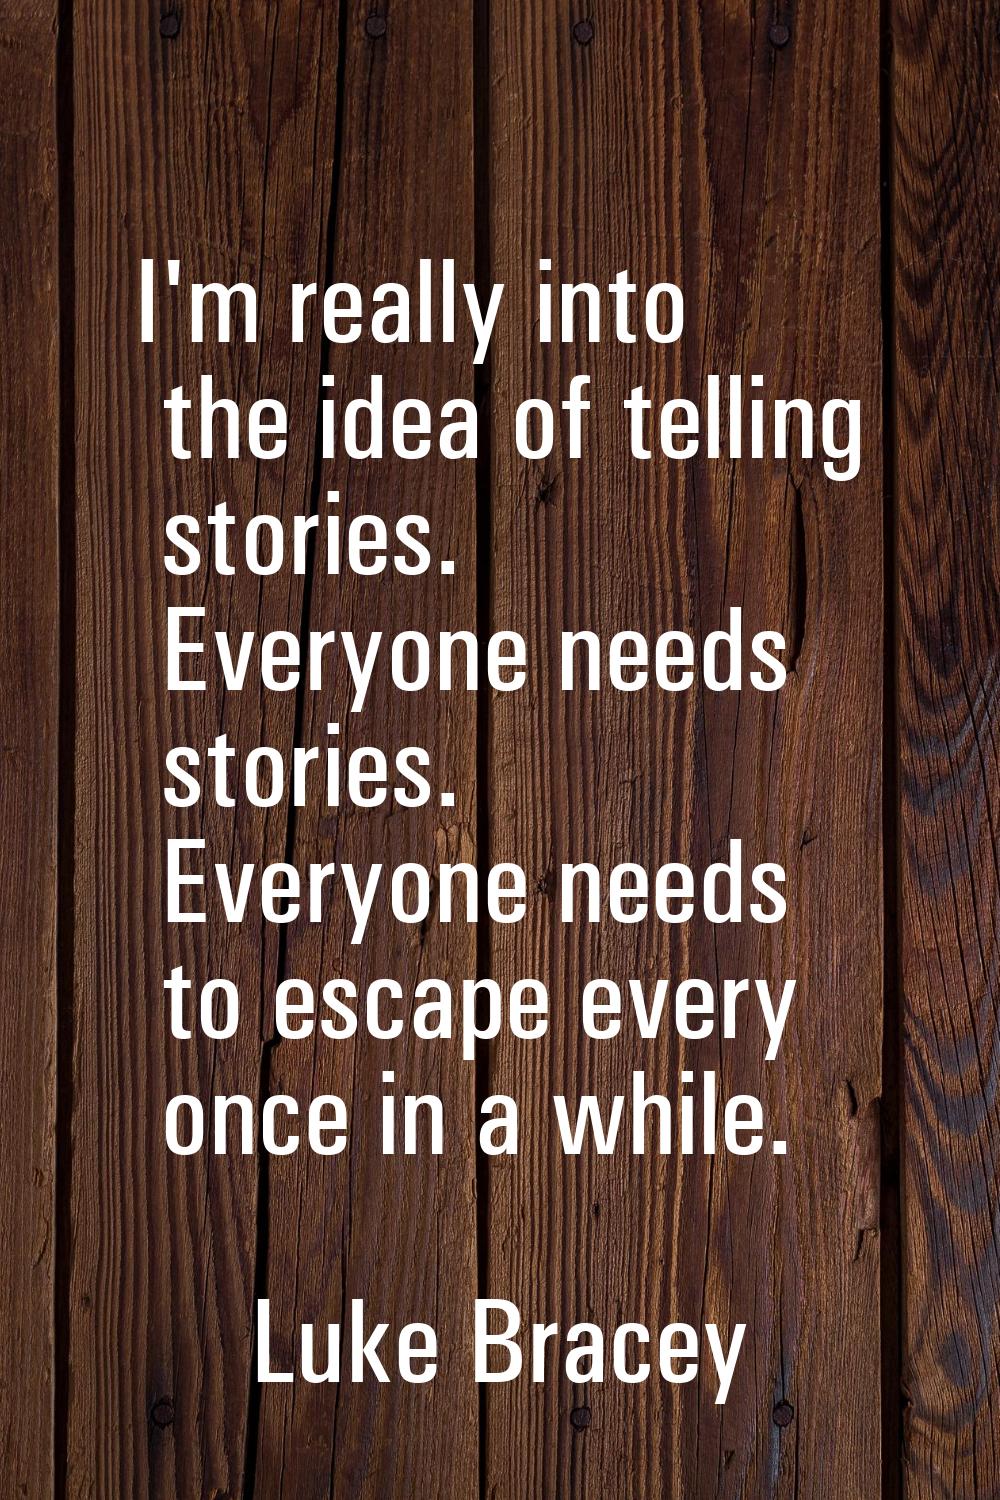 I'm really into the idea of telling stories. Everyone needs stories. Everyone needs to escape every